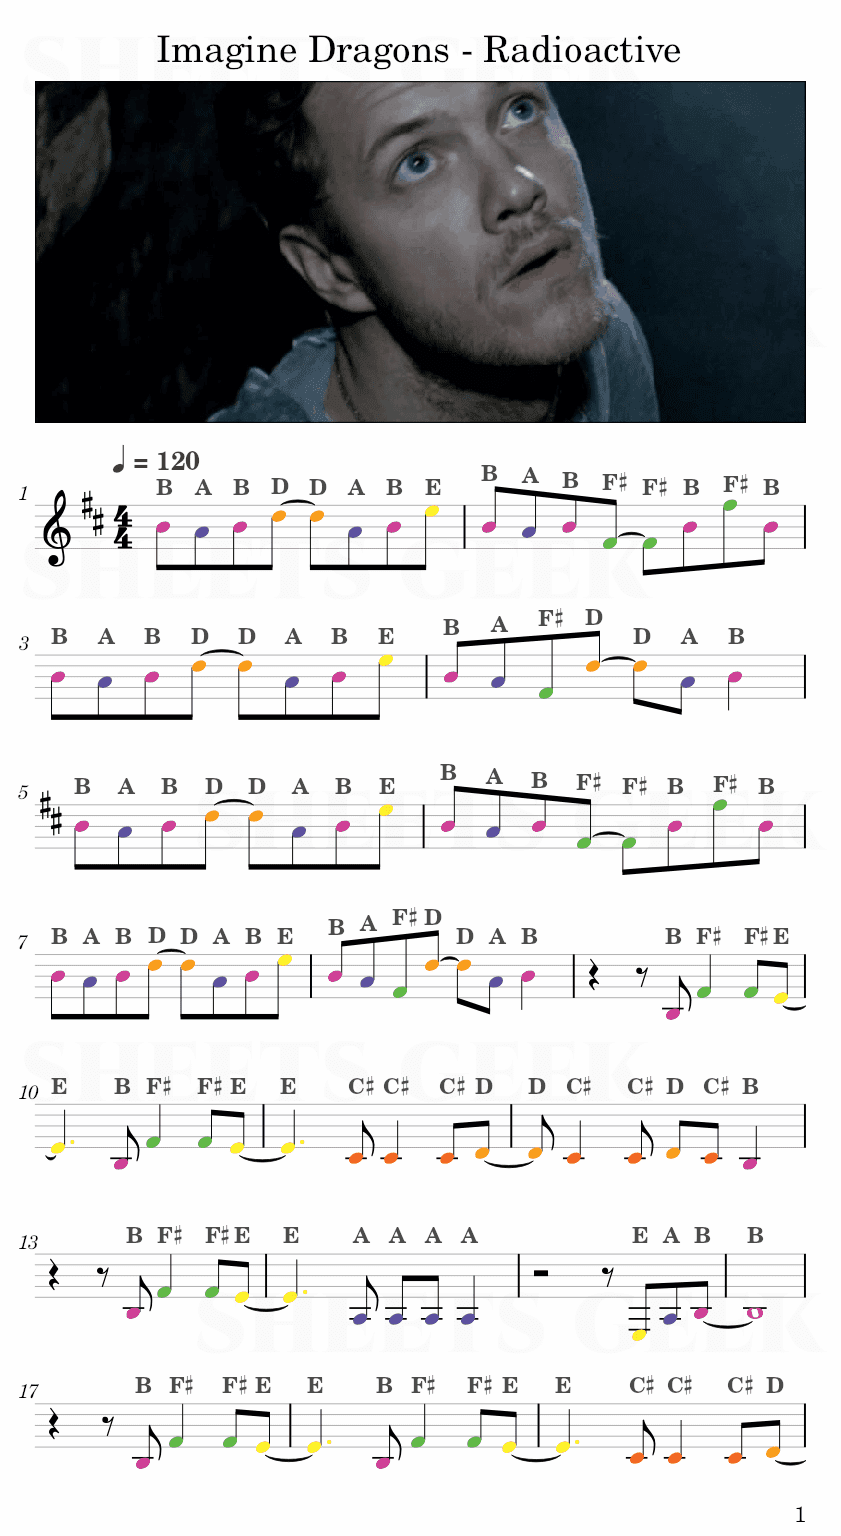 Imagine Dragons - Radioactive Easy Sheet Music Free for piano, keyboard, flute, violin, sax, cello page 1